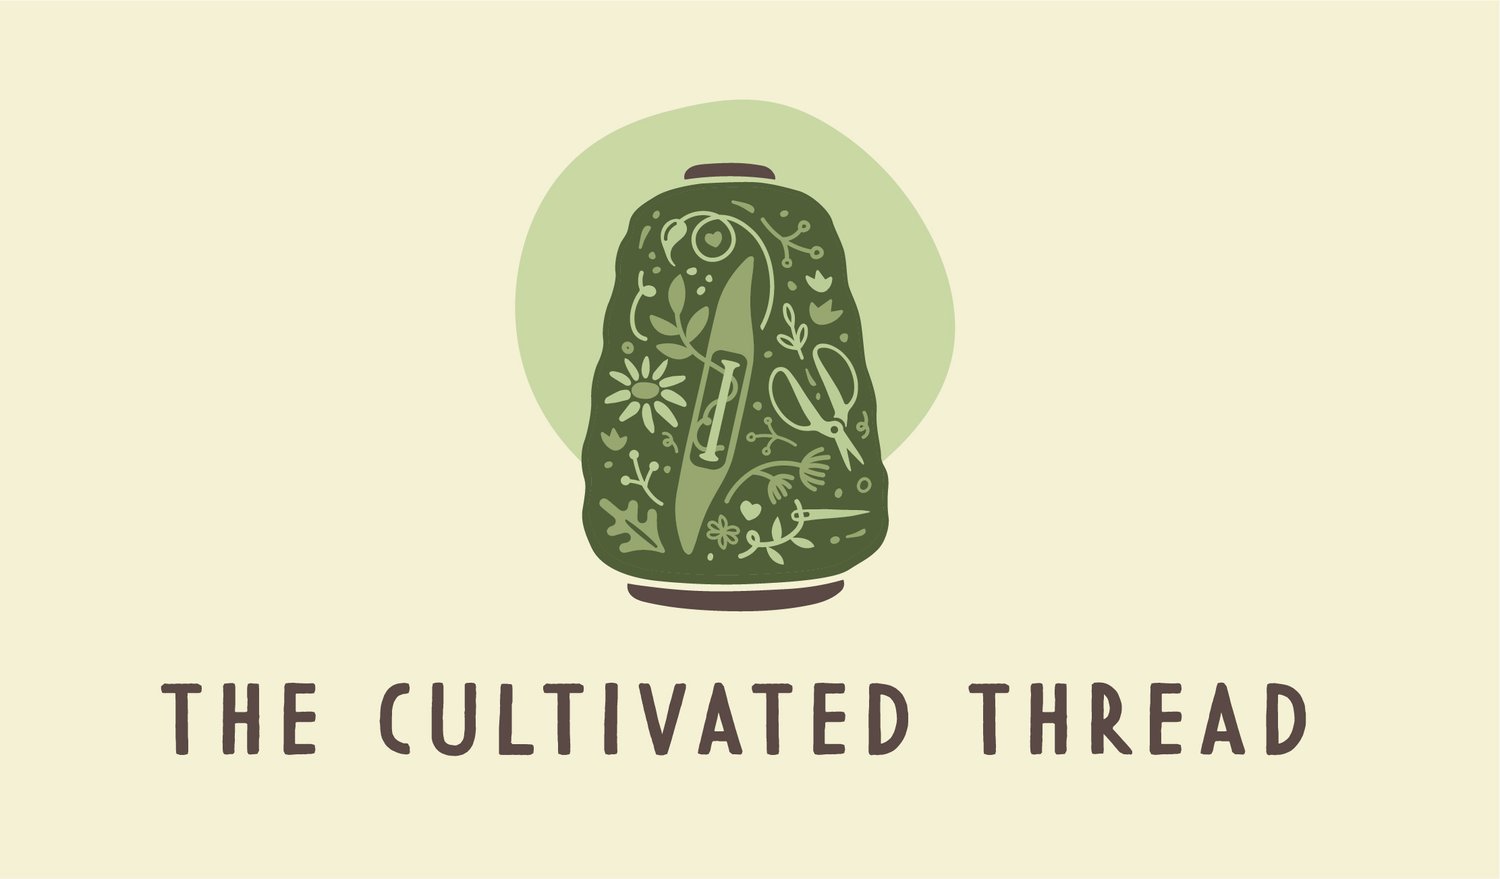 The Cultivated Thread